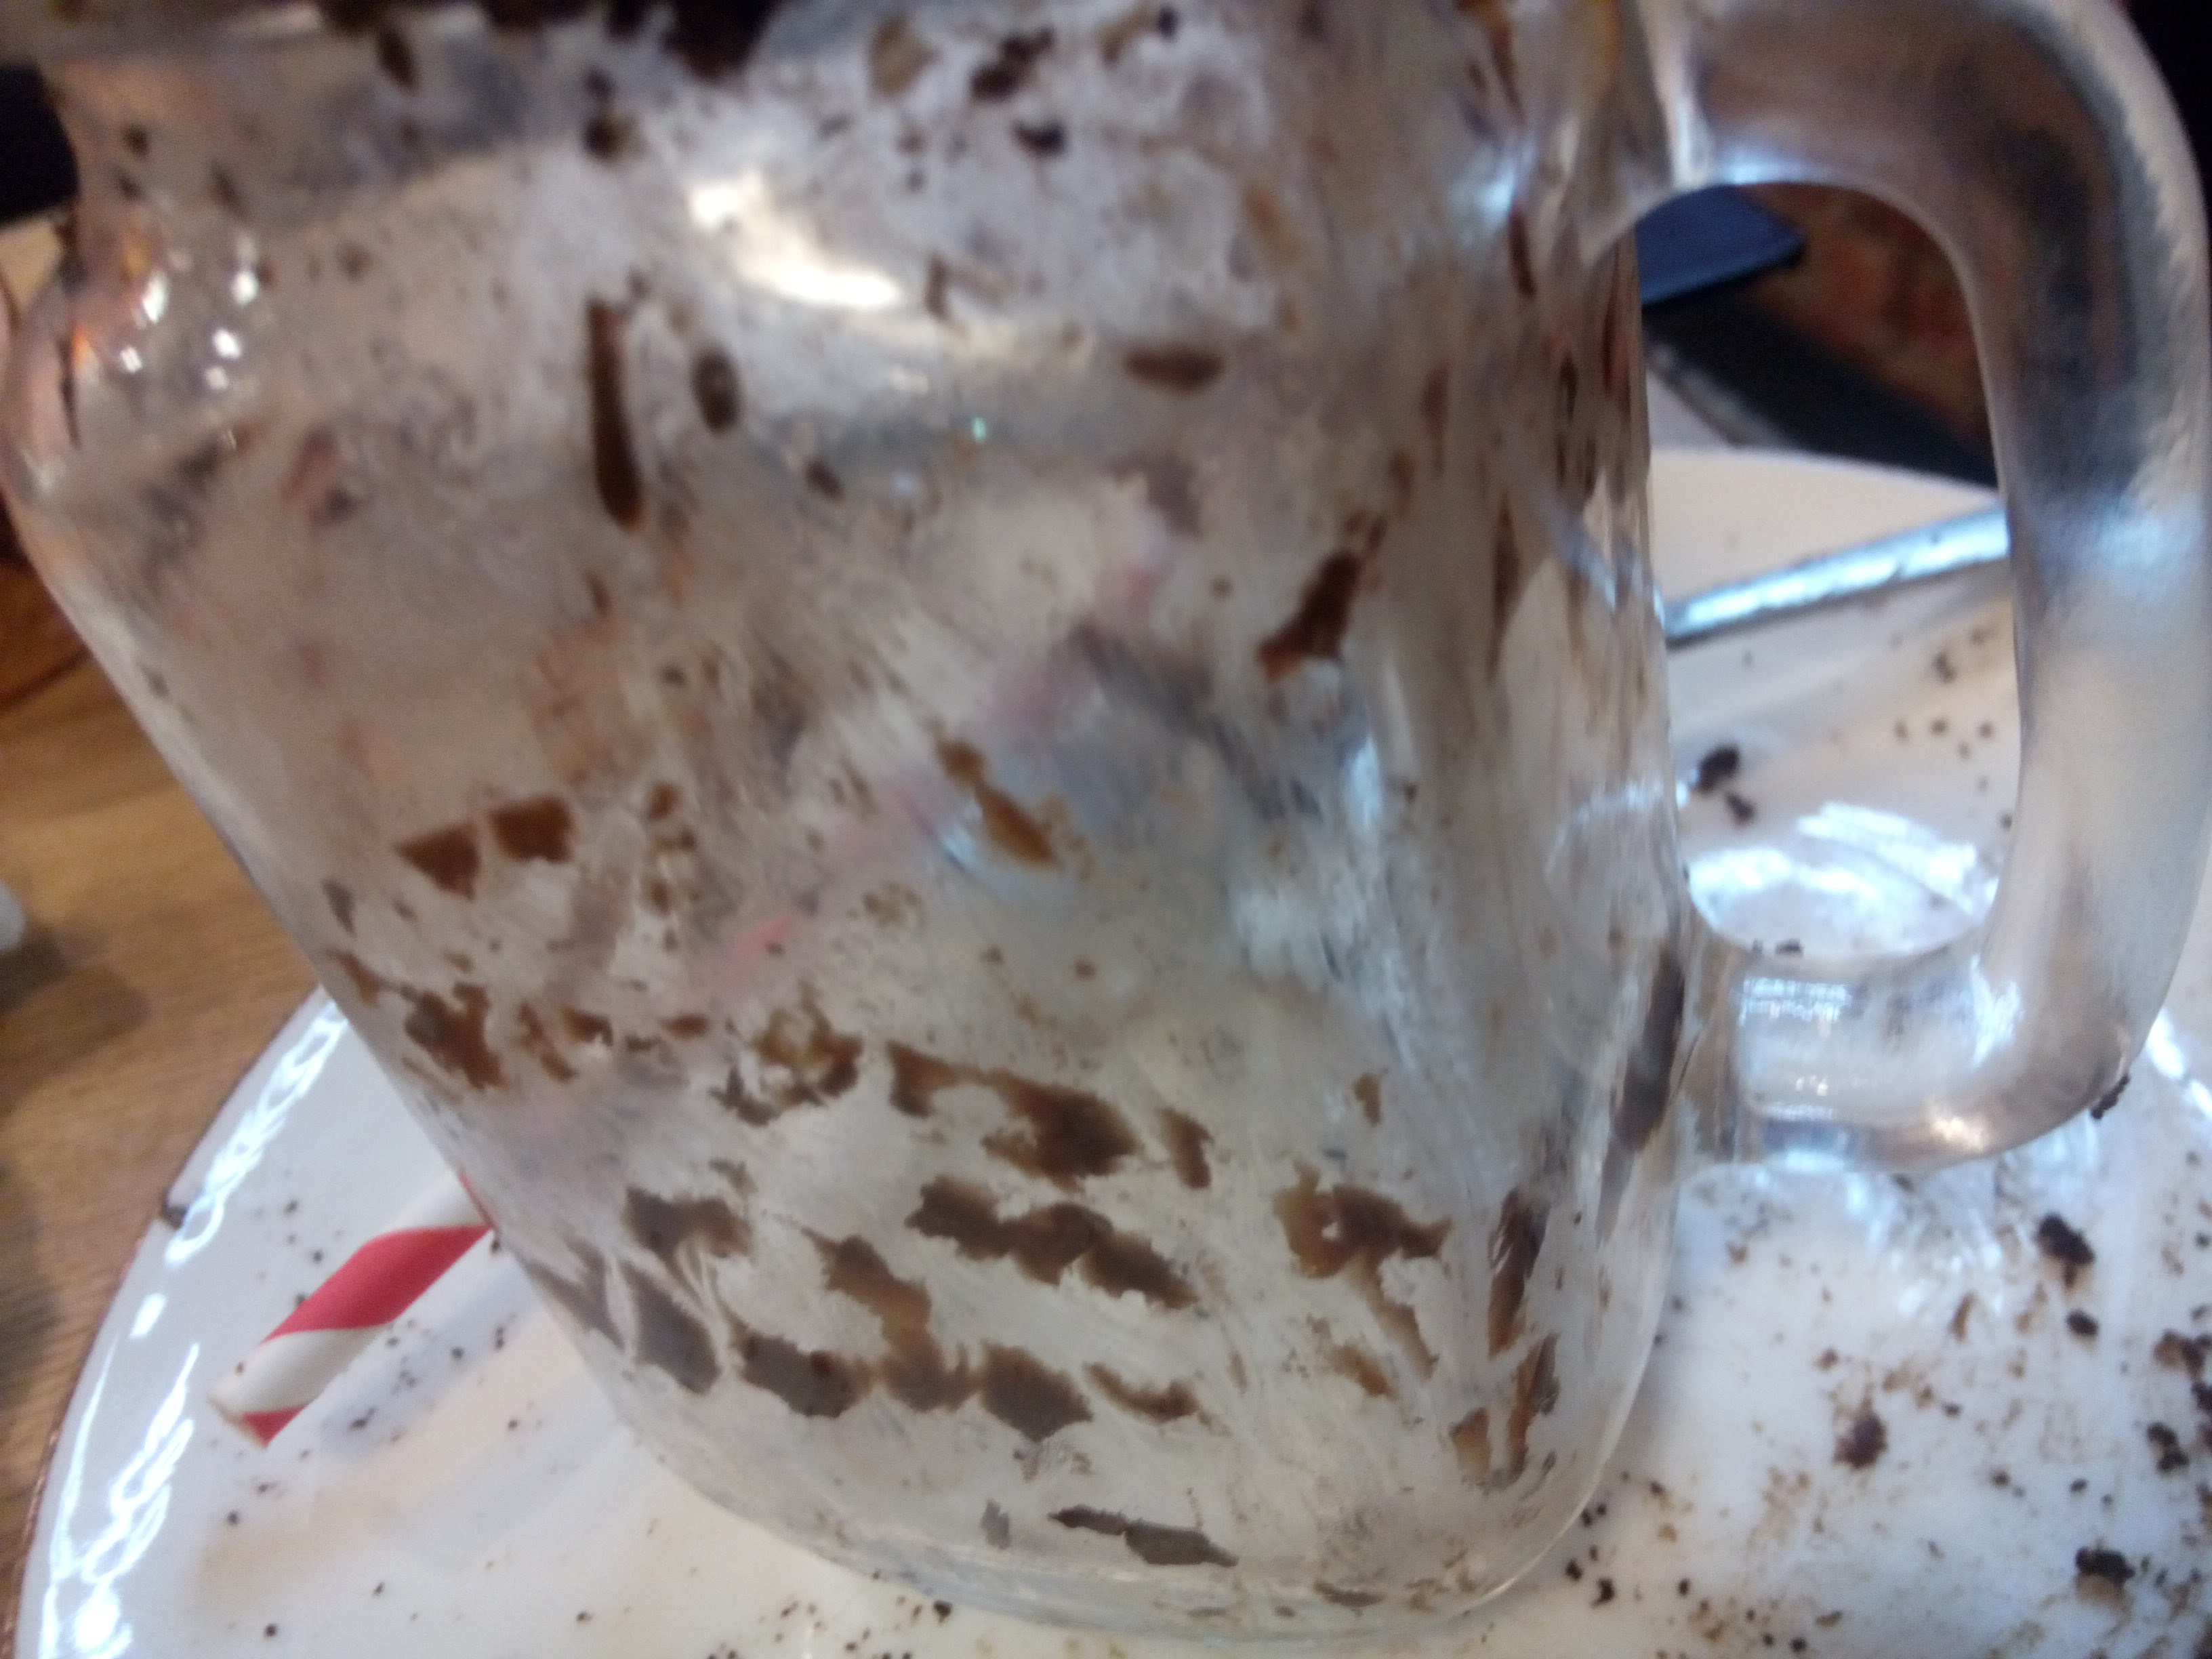 An empty jar-glass with some tiny remains of chocolate on the inside